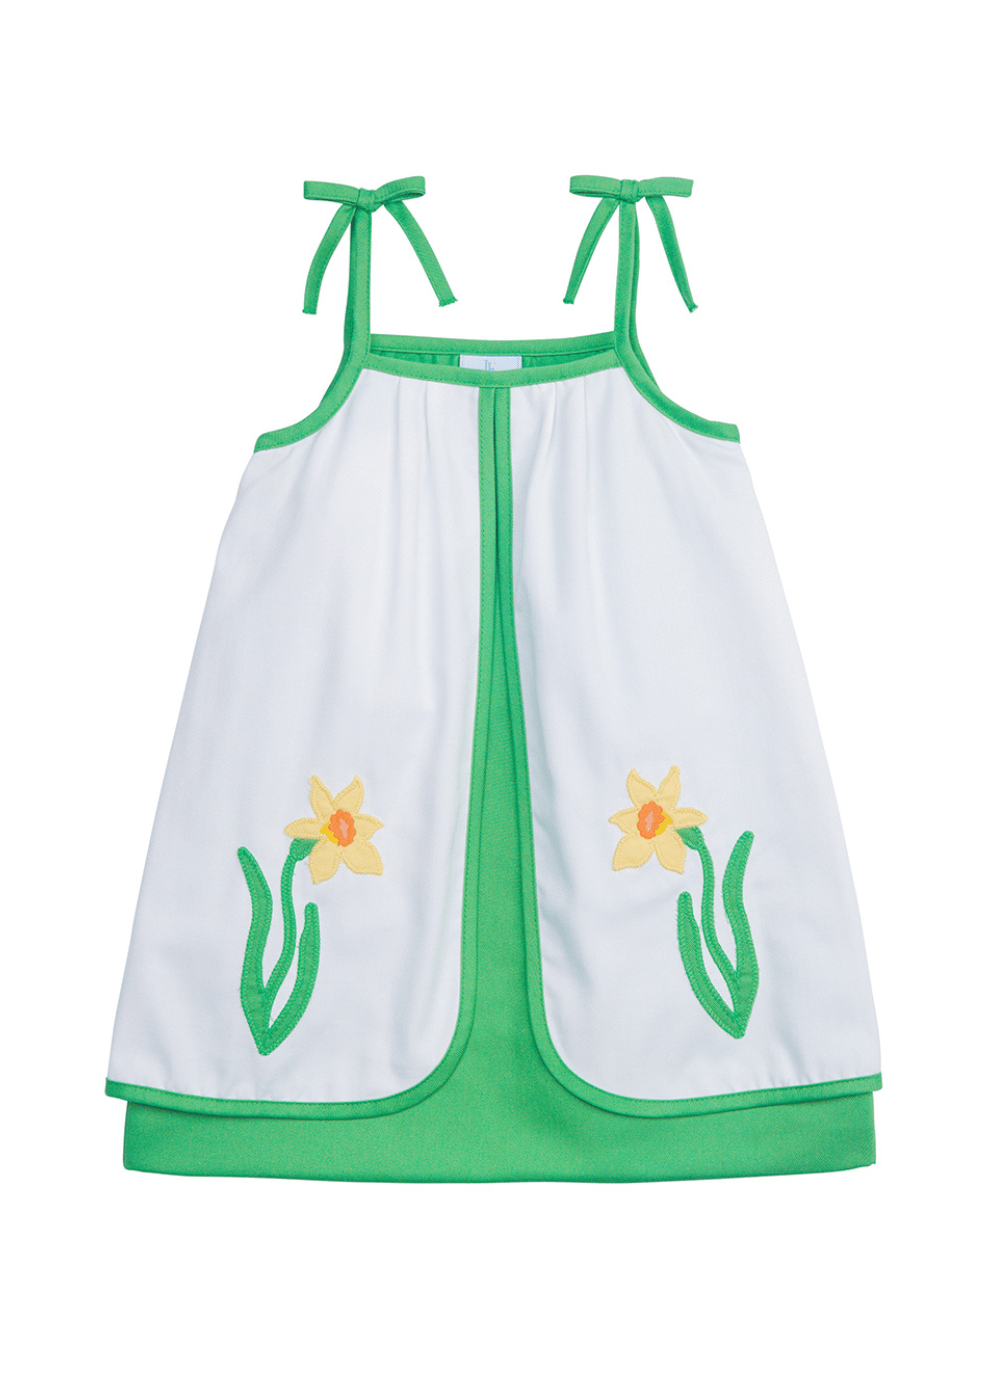 classic childrens clothing girls green and white sundress with daffodil applique